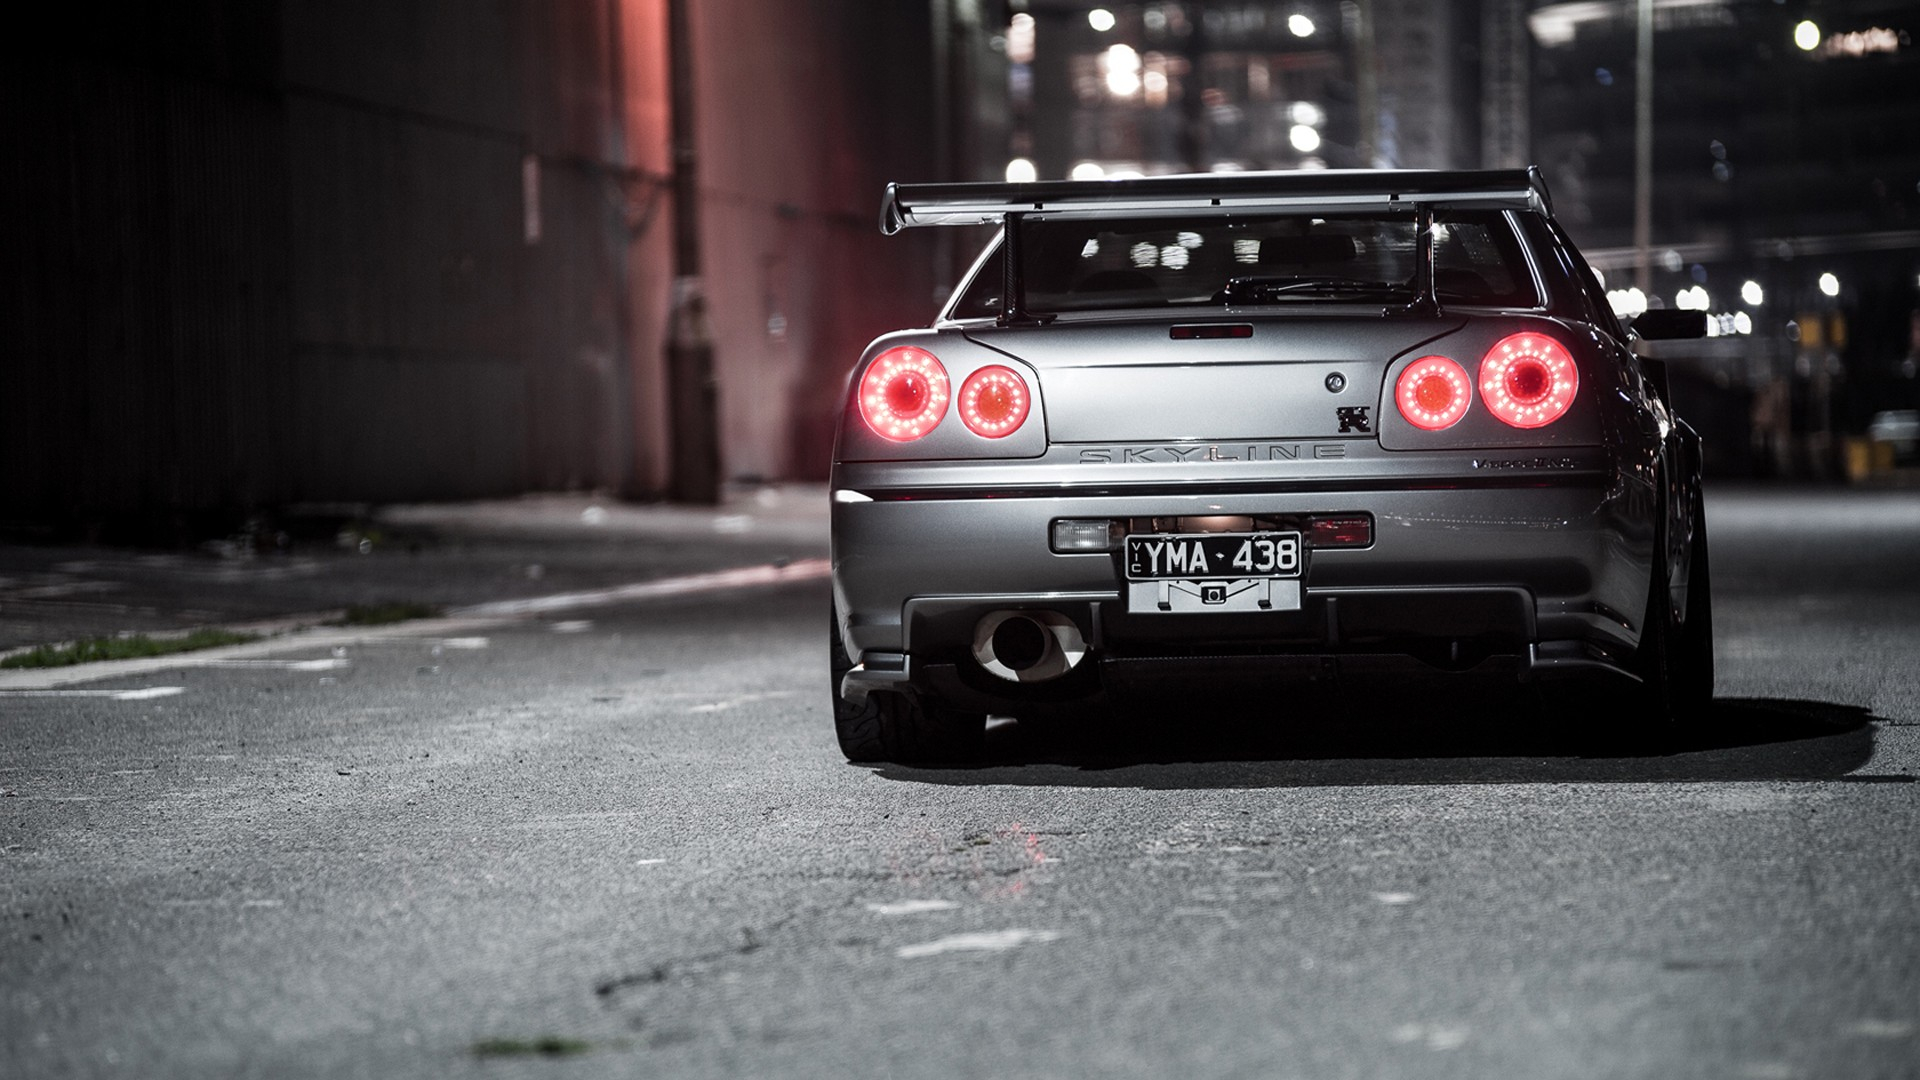 1920x1080 10+ Nissan Skyline R34 HD Wallpapers and Backgrounds